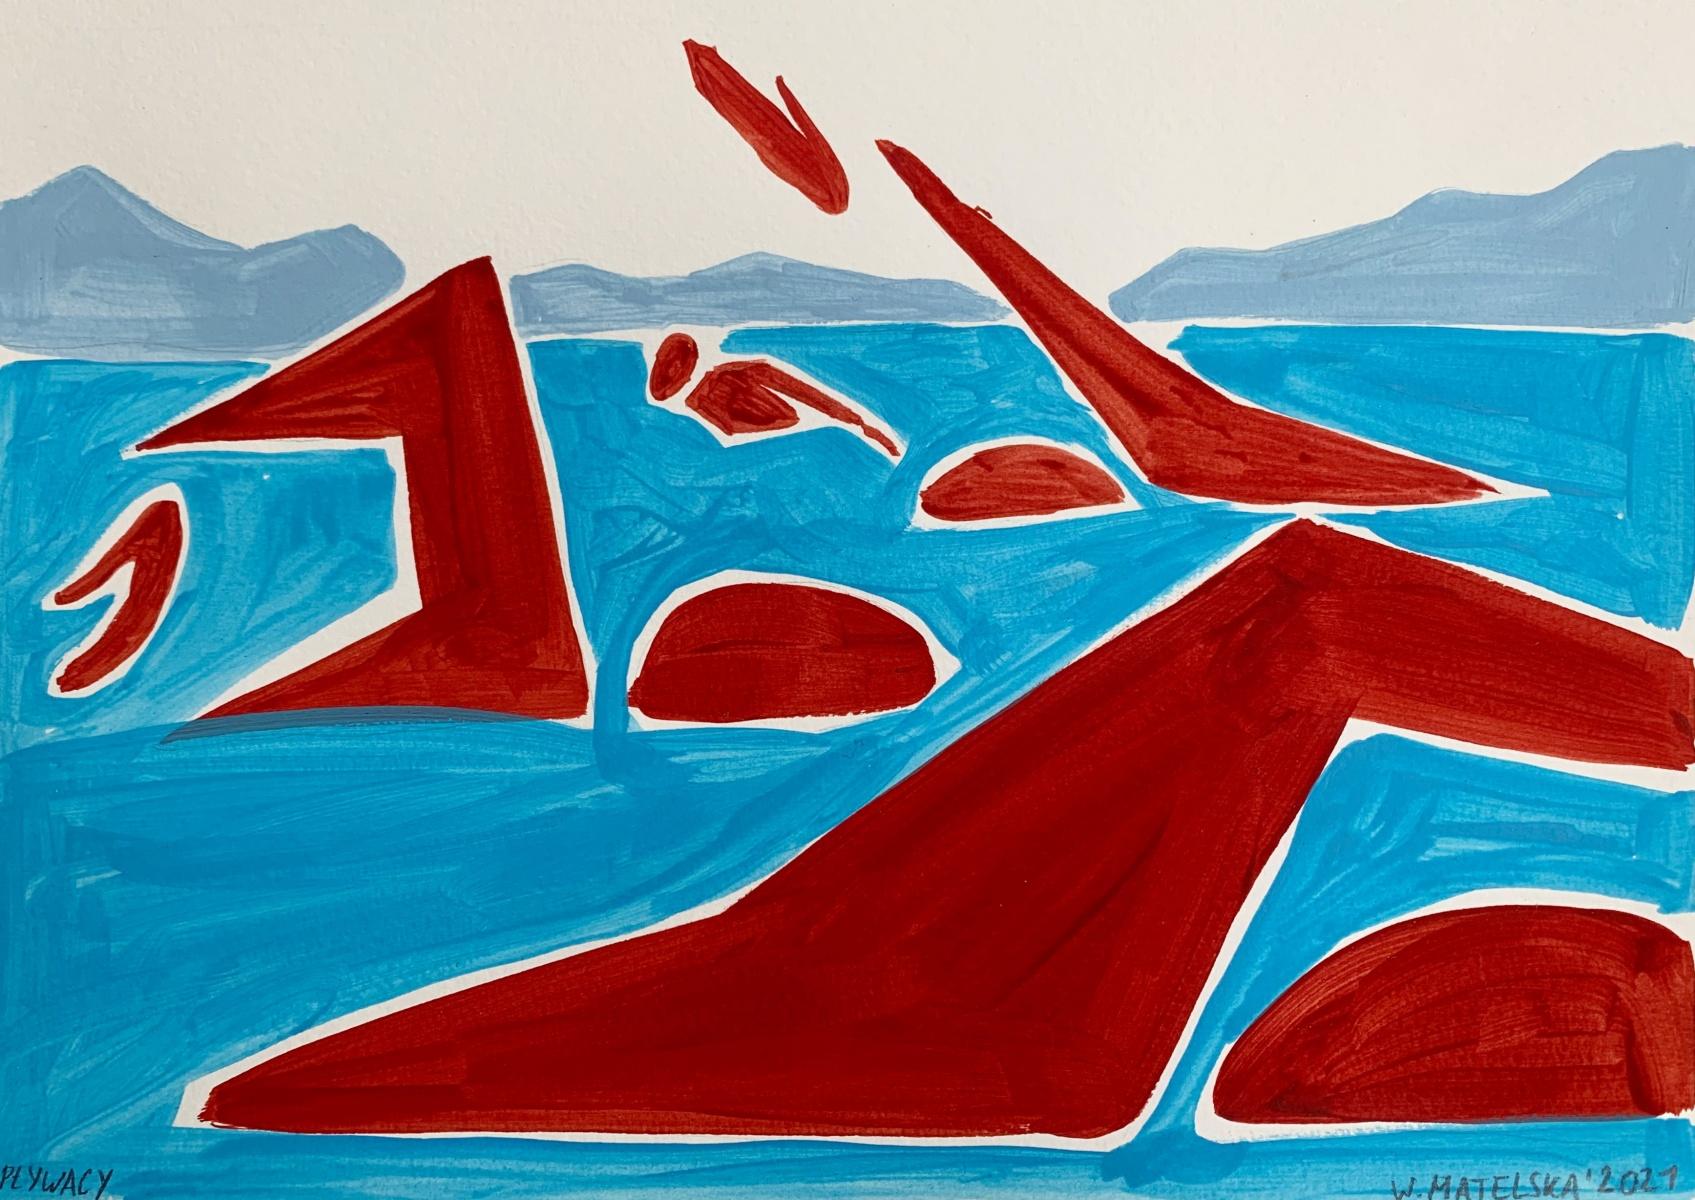 Figurative acrylic on paper painting by young professional European artist Waleria Matelska. Artwork is minimalistic and composed with synthetic shapes. Painting is vibrant- main colors are blue and red. Scene takes place in the water during day